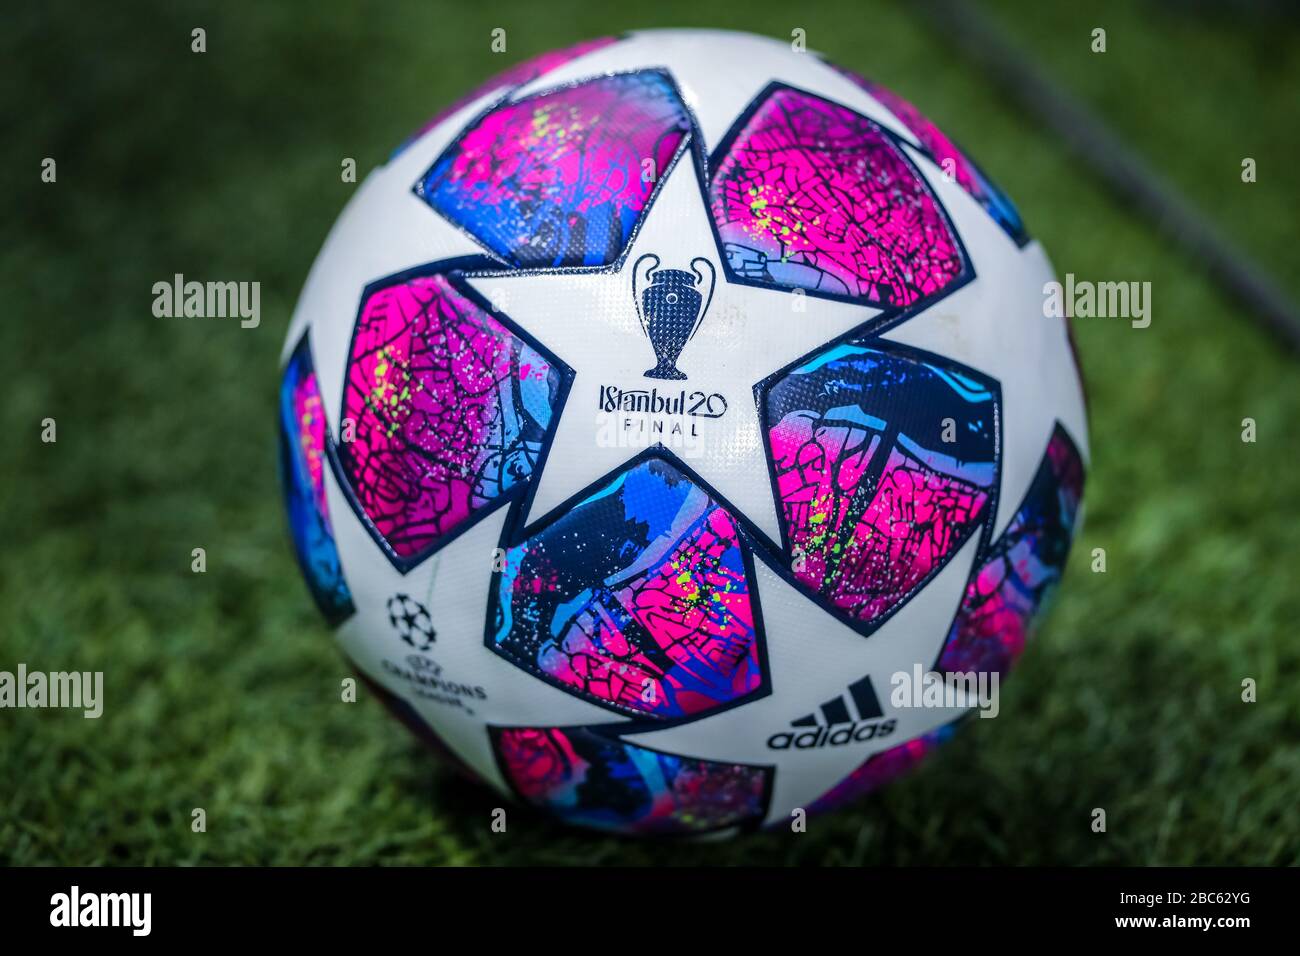 UEFA Champion League official ball Istambul 2020 final during soccer season  2019/20 symbolic images - Photo credit Fabrizio Carabelli /LM Stock Photo -  Alamy